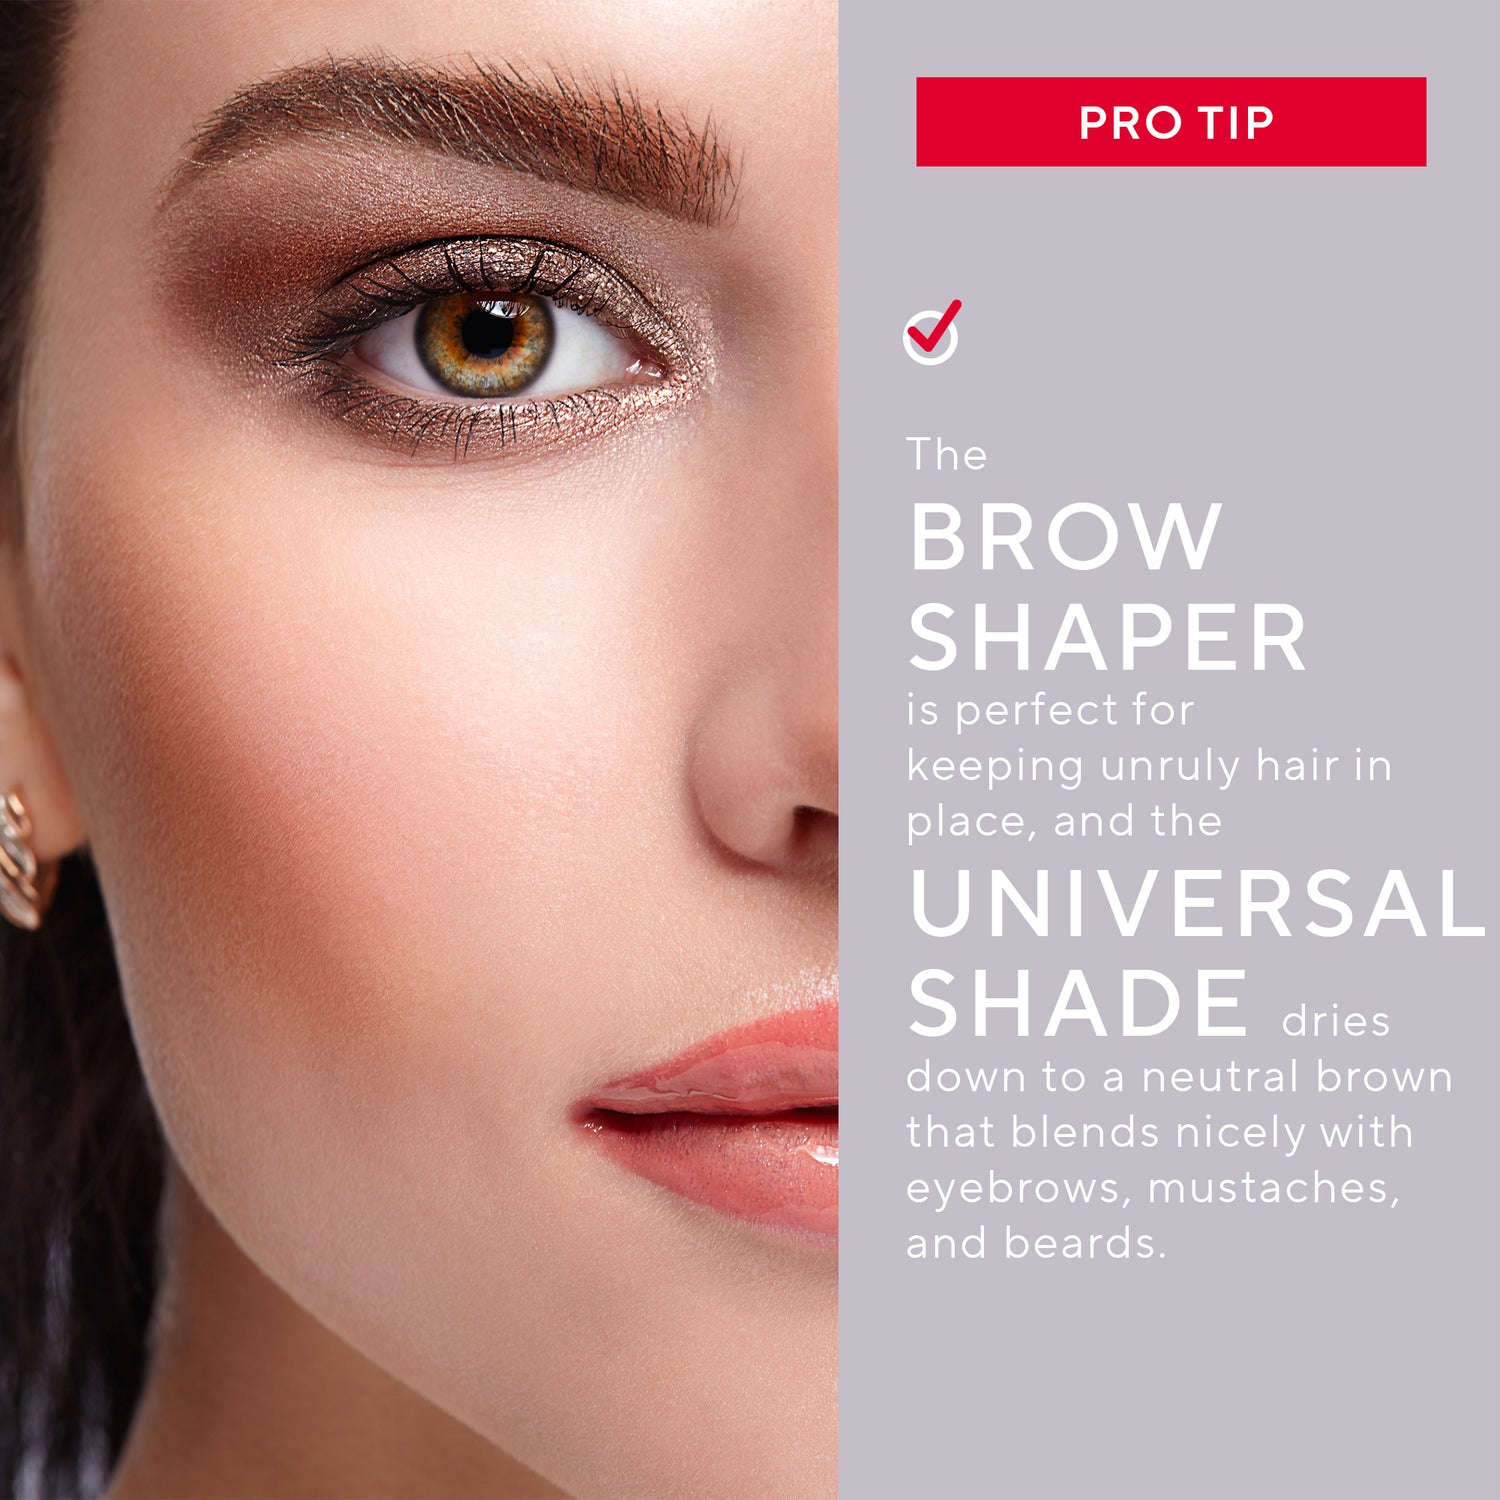 Mirabella Brow Shaper - Pro tips for using the brow gel